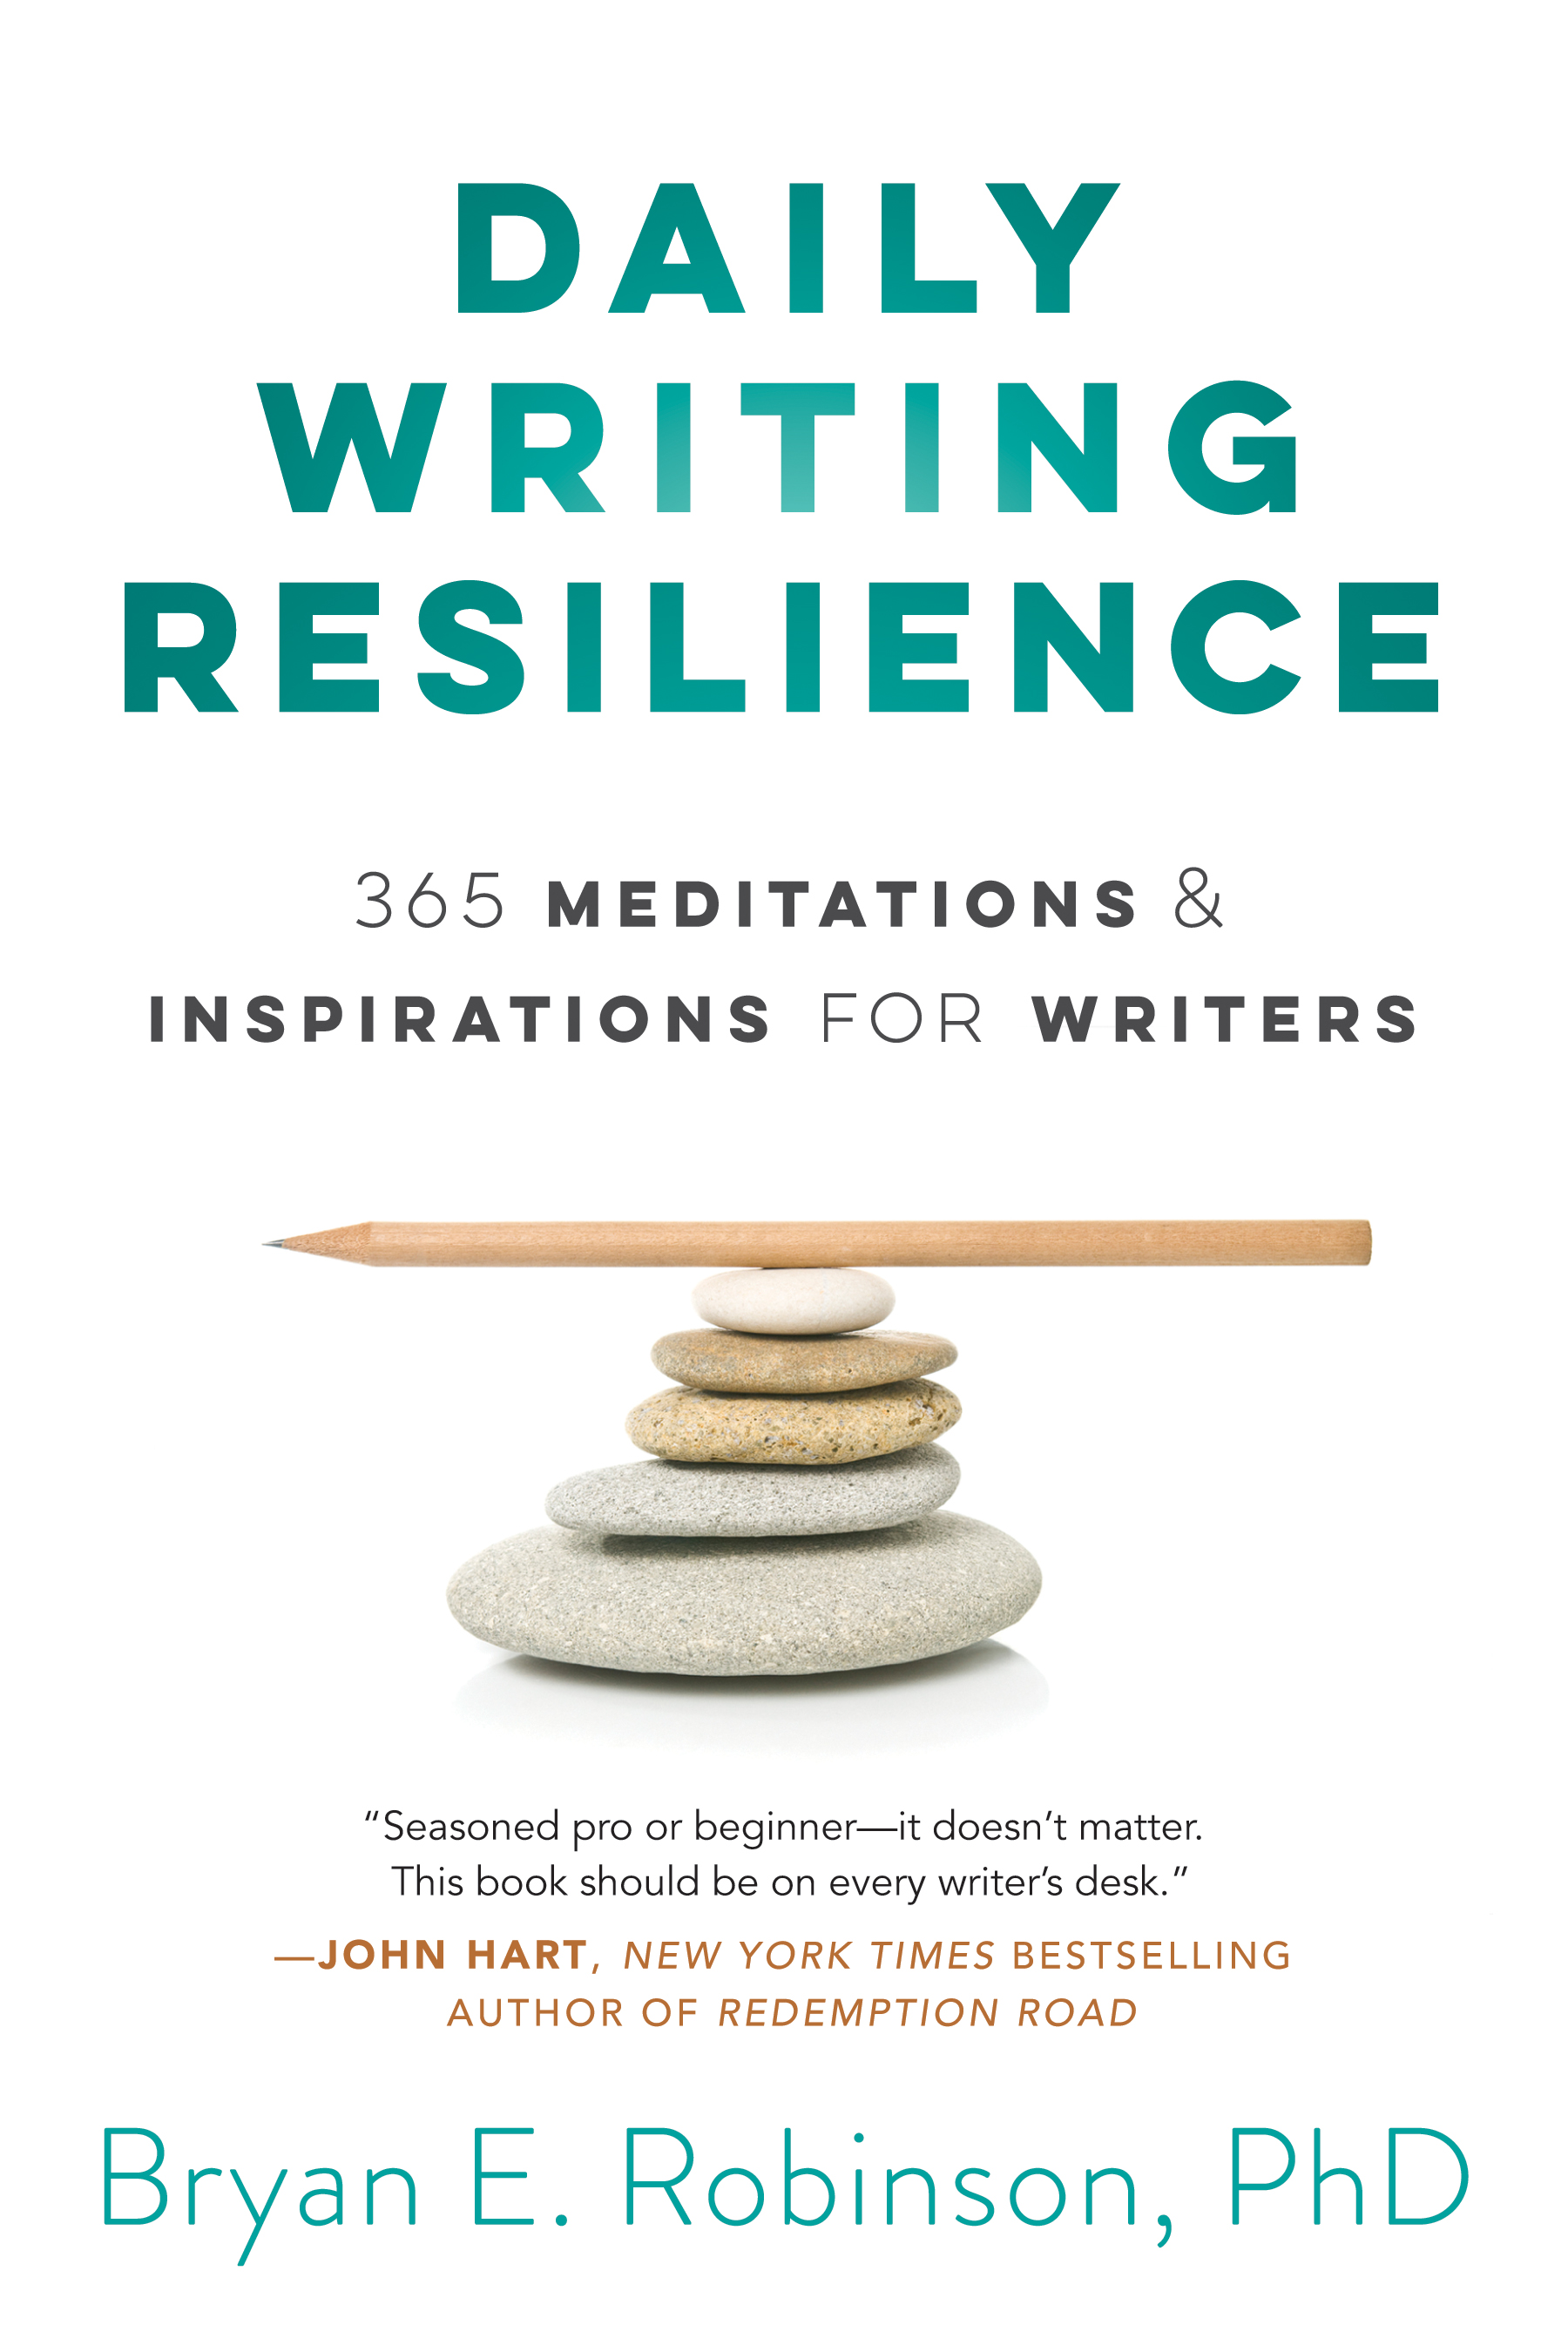 https://content.thriveglobal.com/wp-content/uploads/2020/03/COVER-Daily-Writing-Resilience-4.jpg?w=683